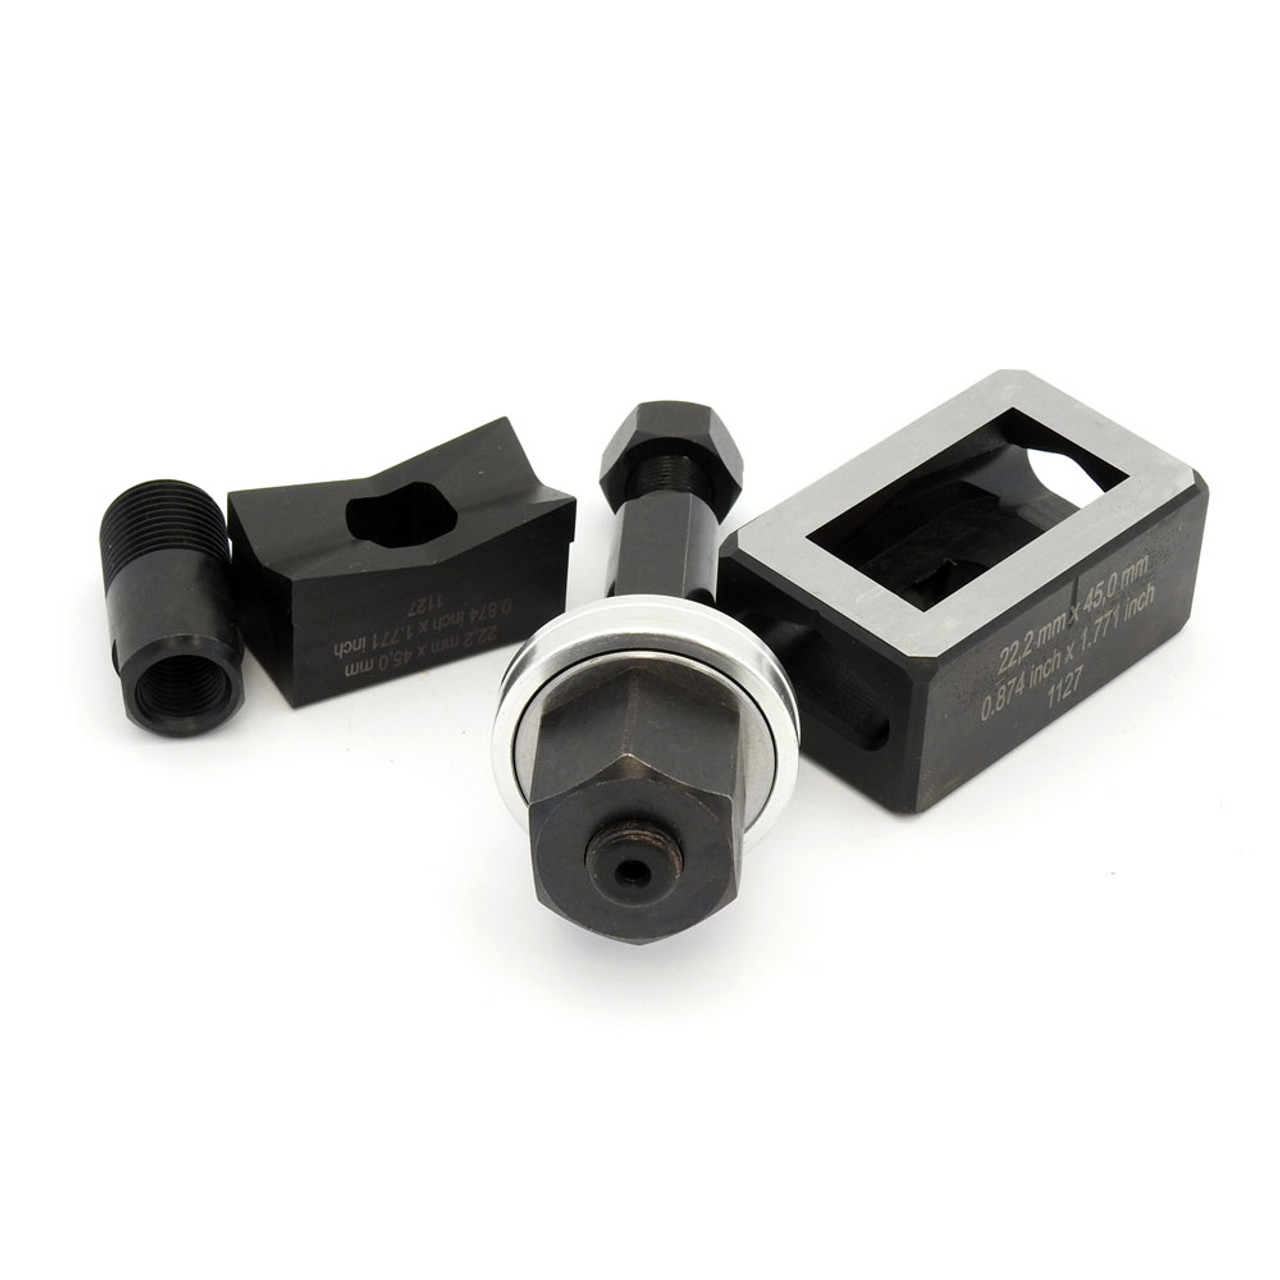 Alfra 36 X 52mm Rectangular Punch/Die Set For 6 Pin Connectors